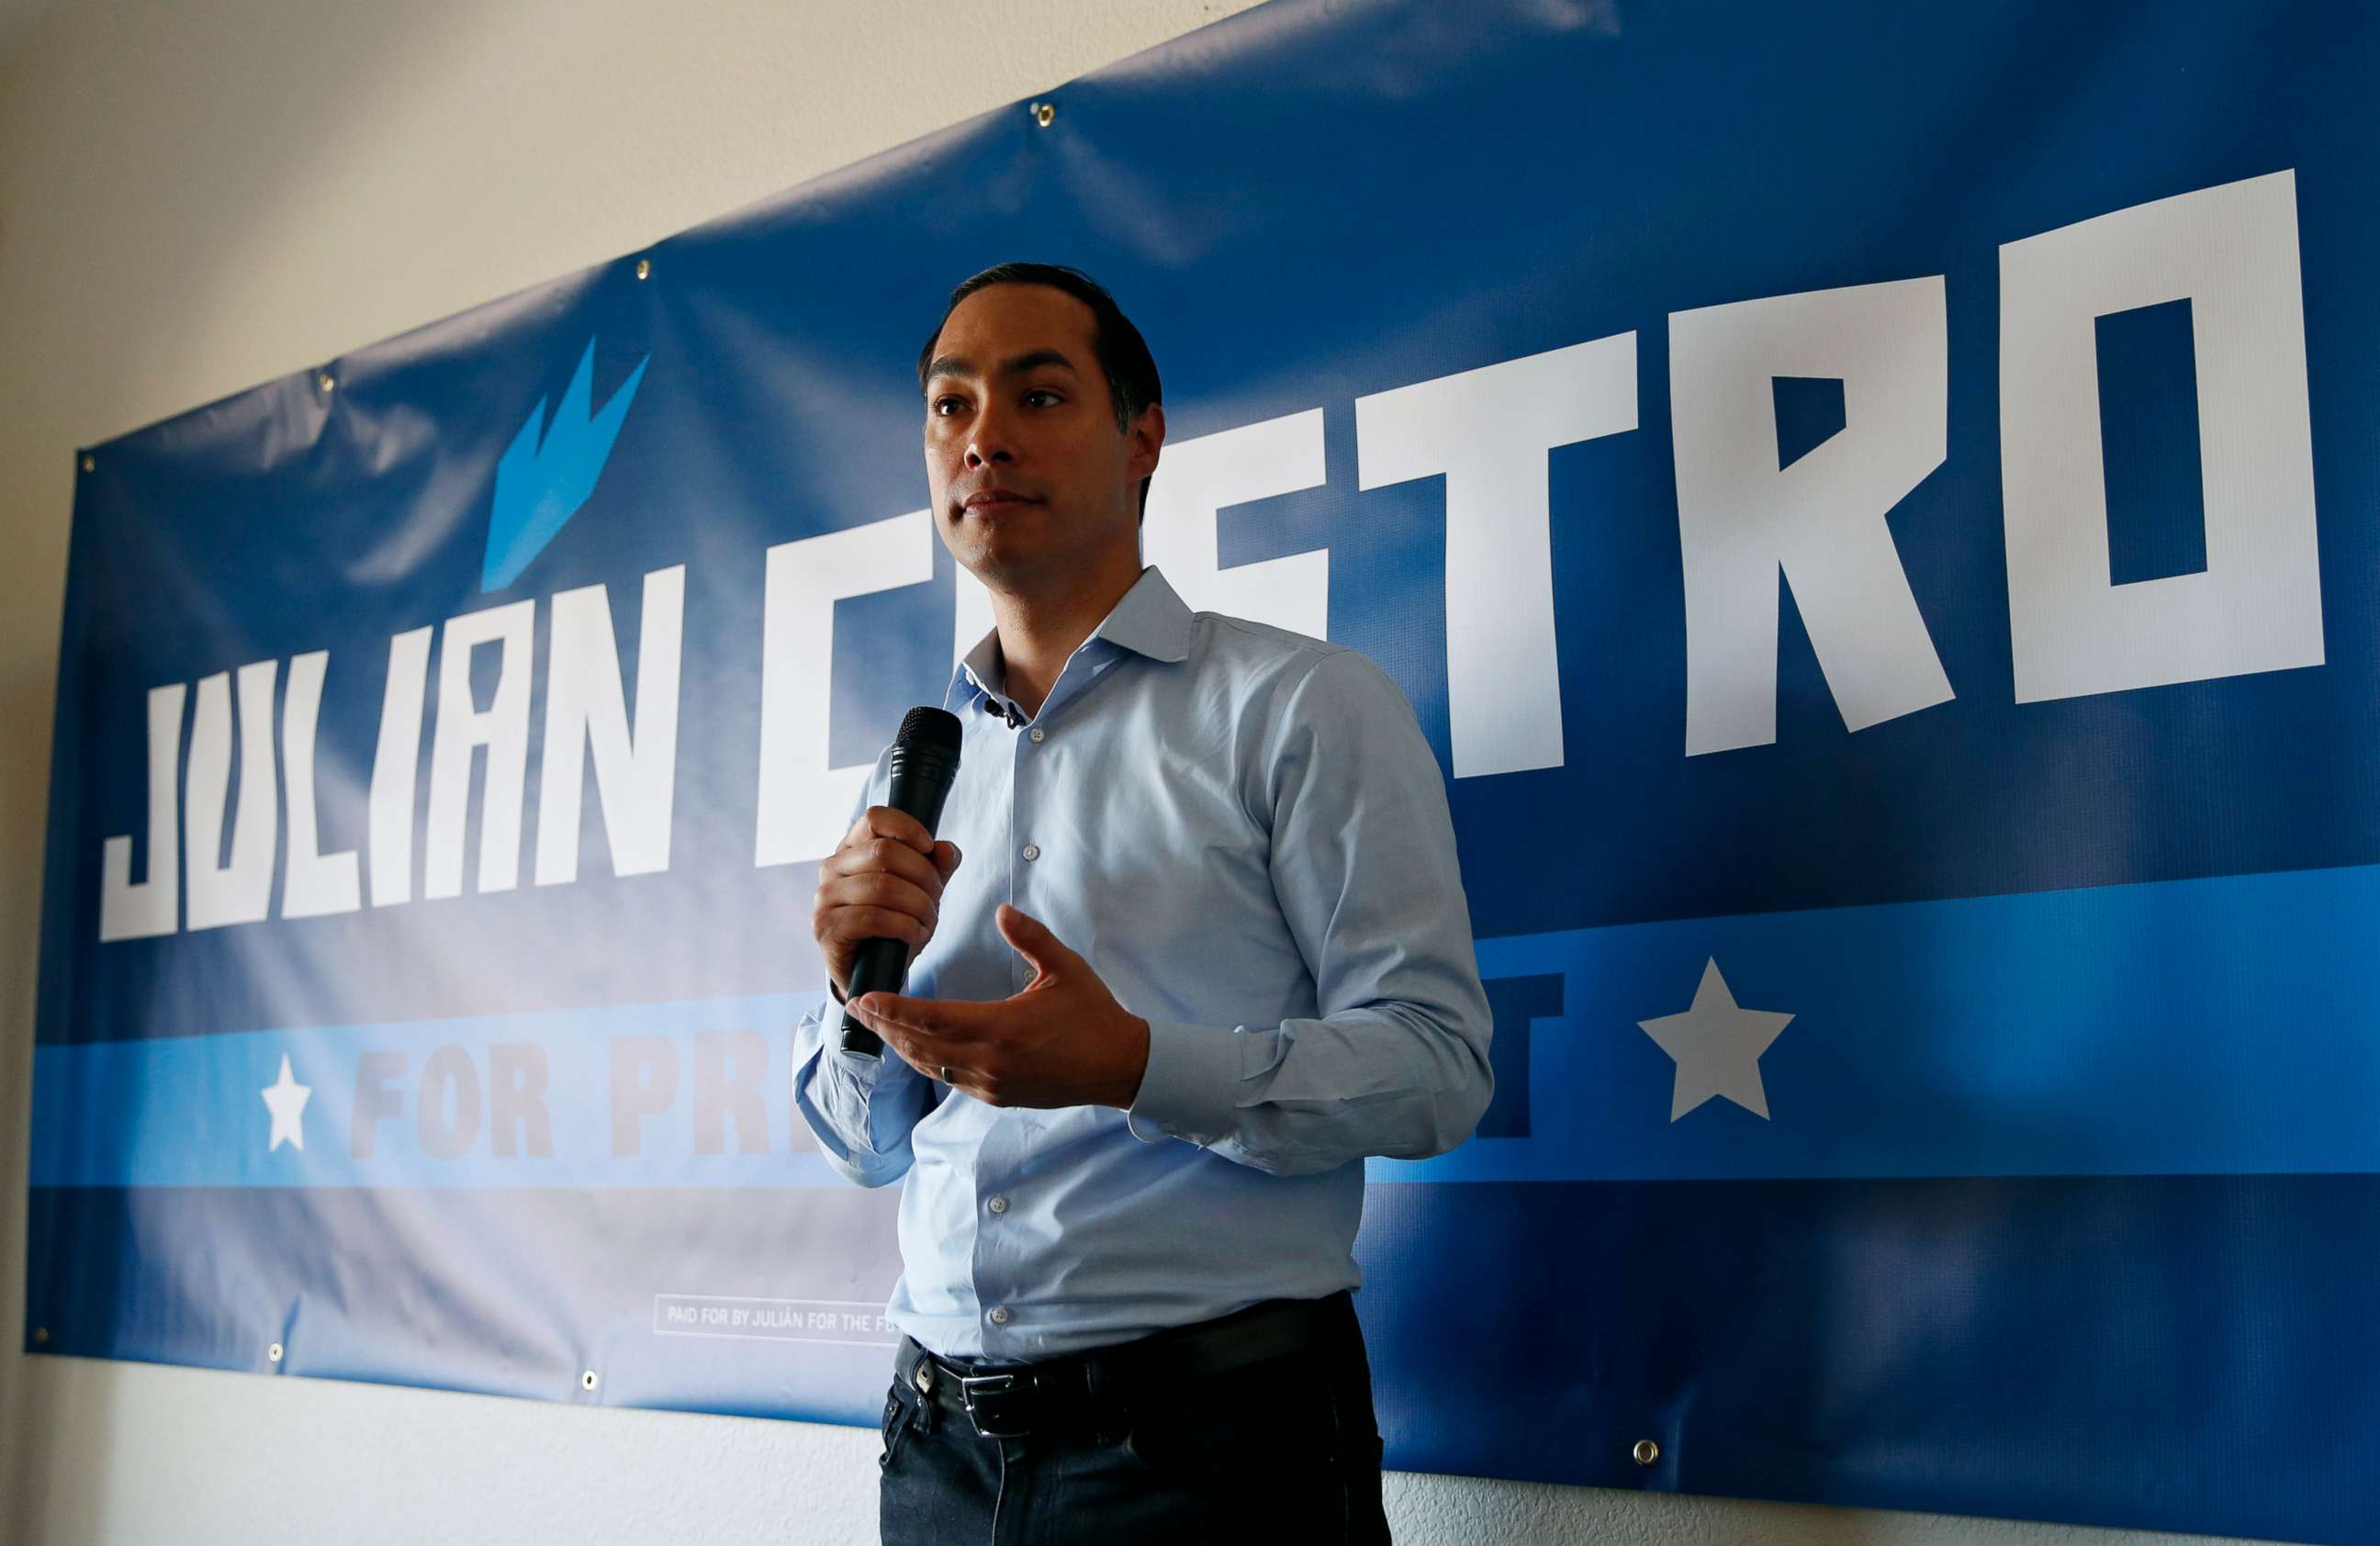 PHOTO: Former Housing and Urban Development Secretary and Democratic presidential candidate Julian Castro speaks at a campaign event at a home Friday, Aug. 2, 2019, in Boulder City, Nev.